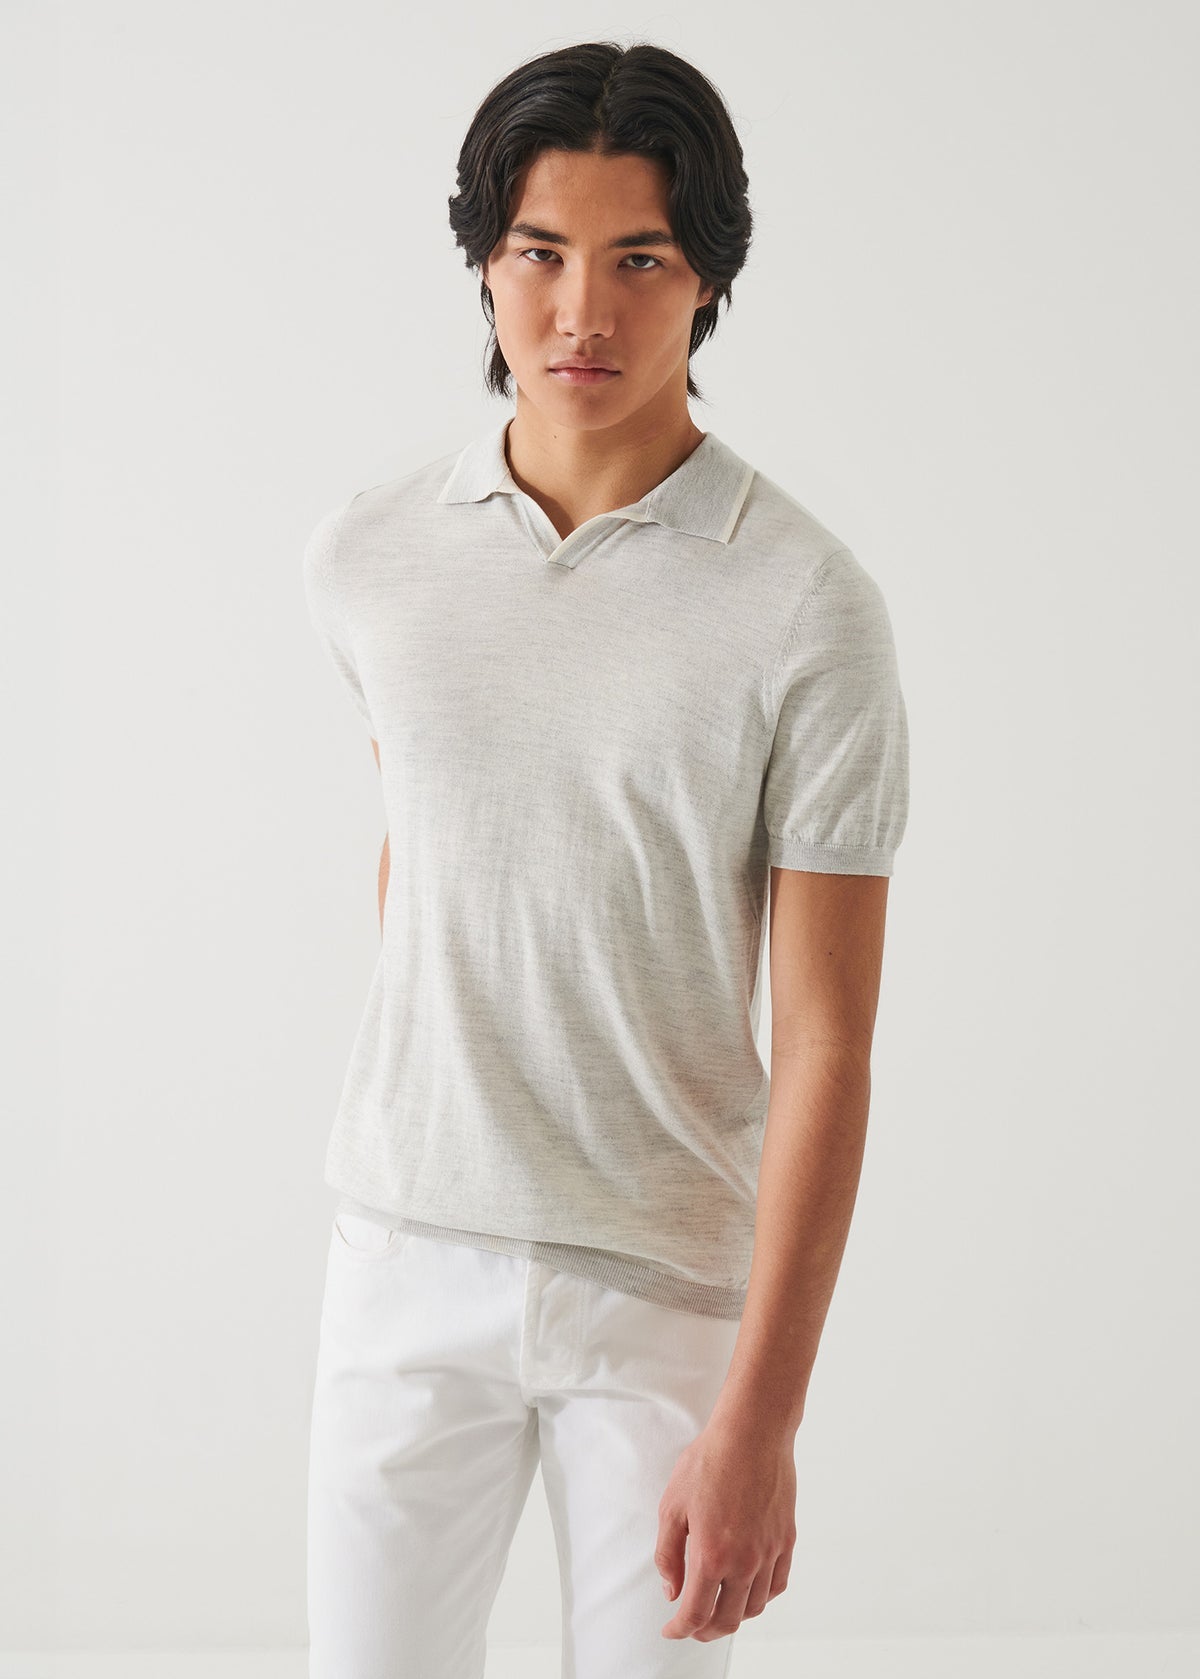 Patrick Assaraf Cot Cupro Tipped Polo